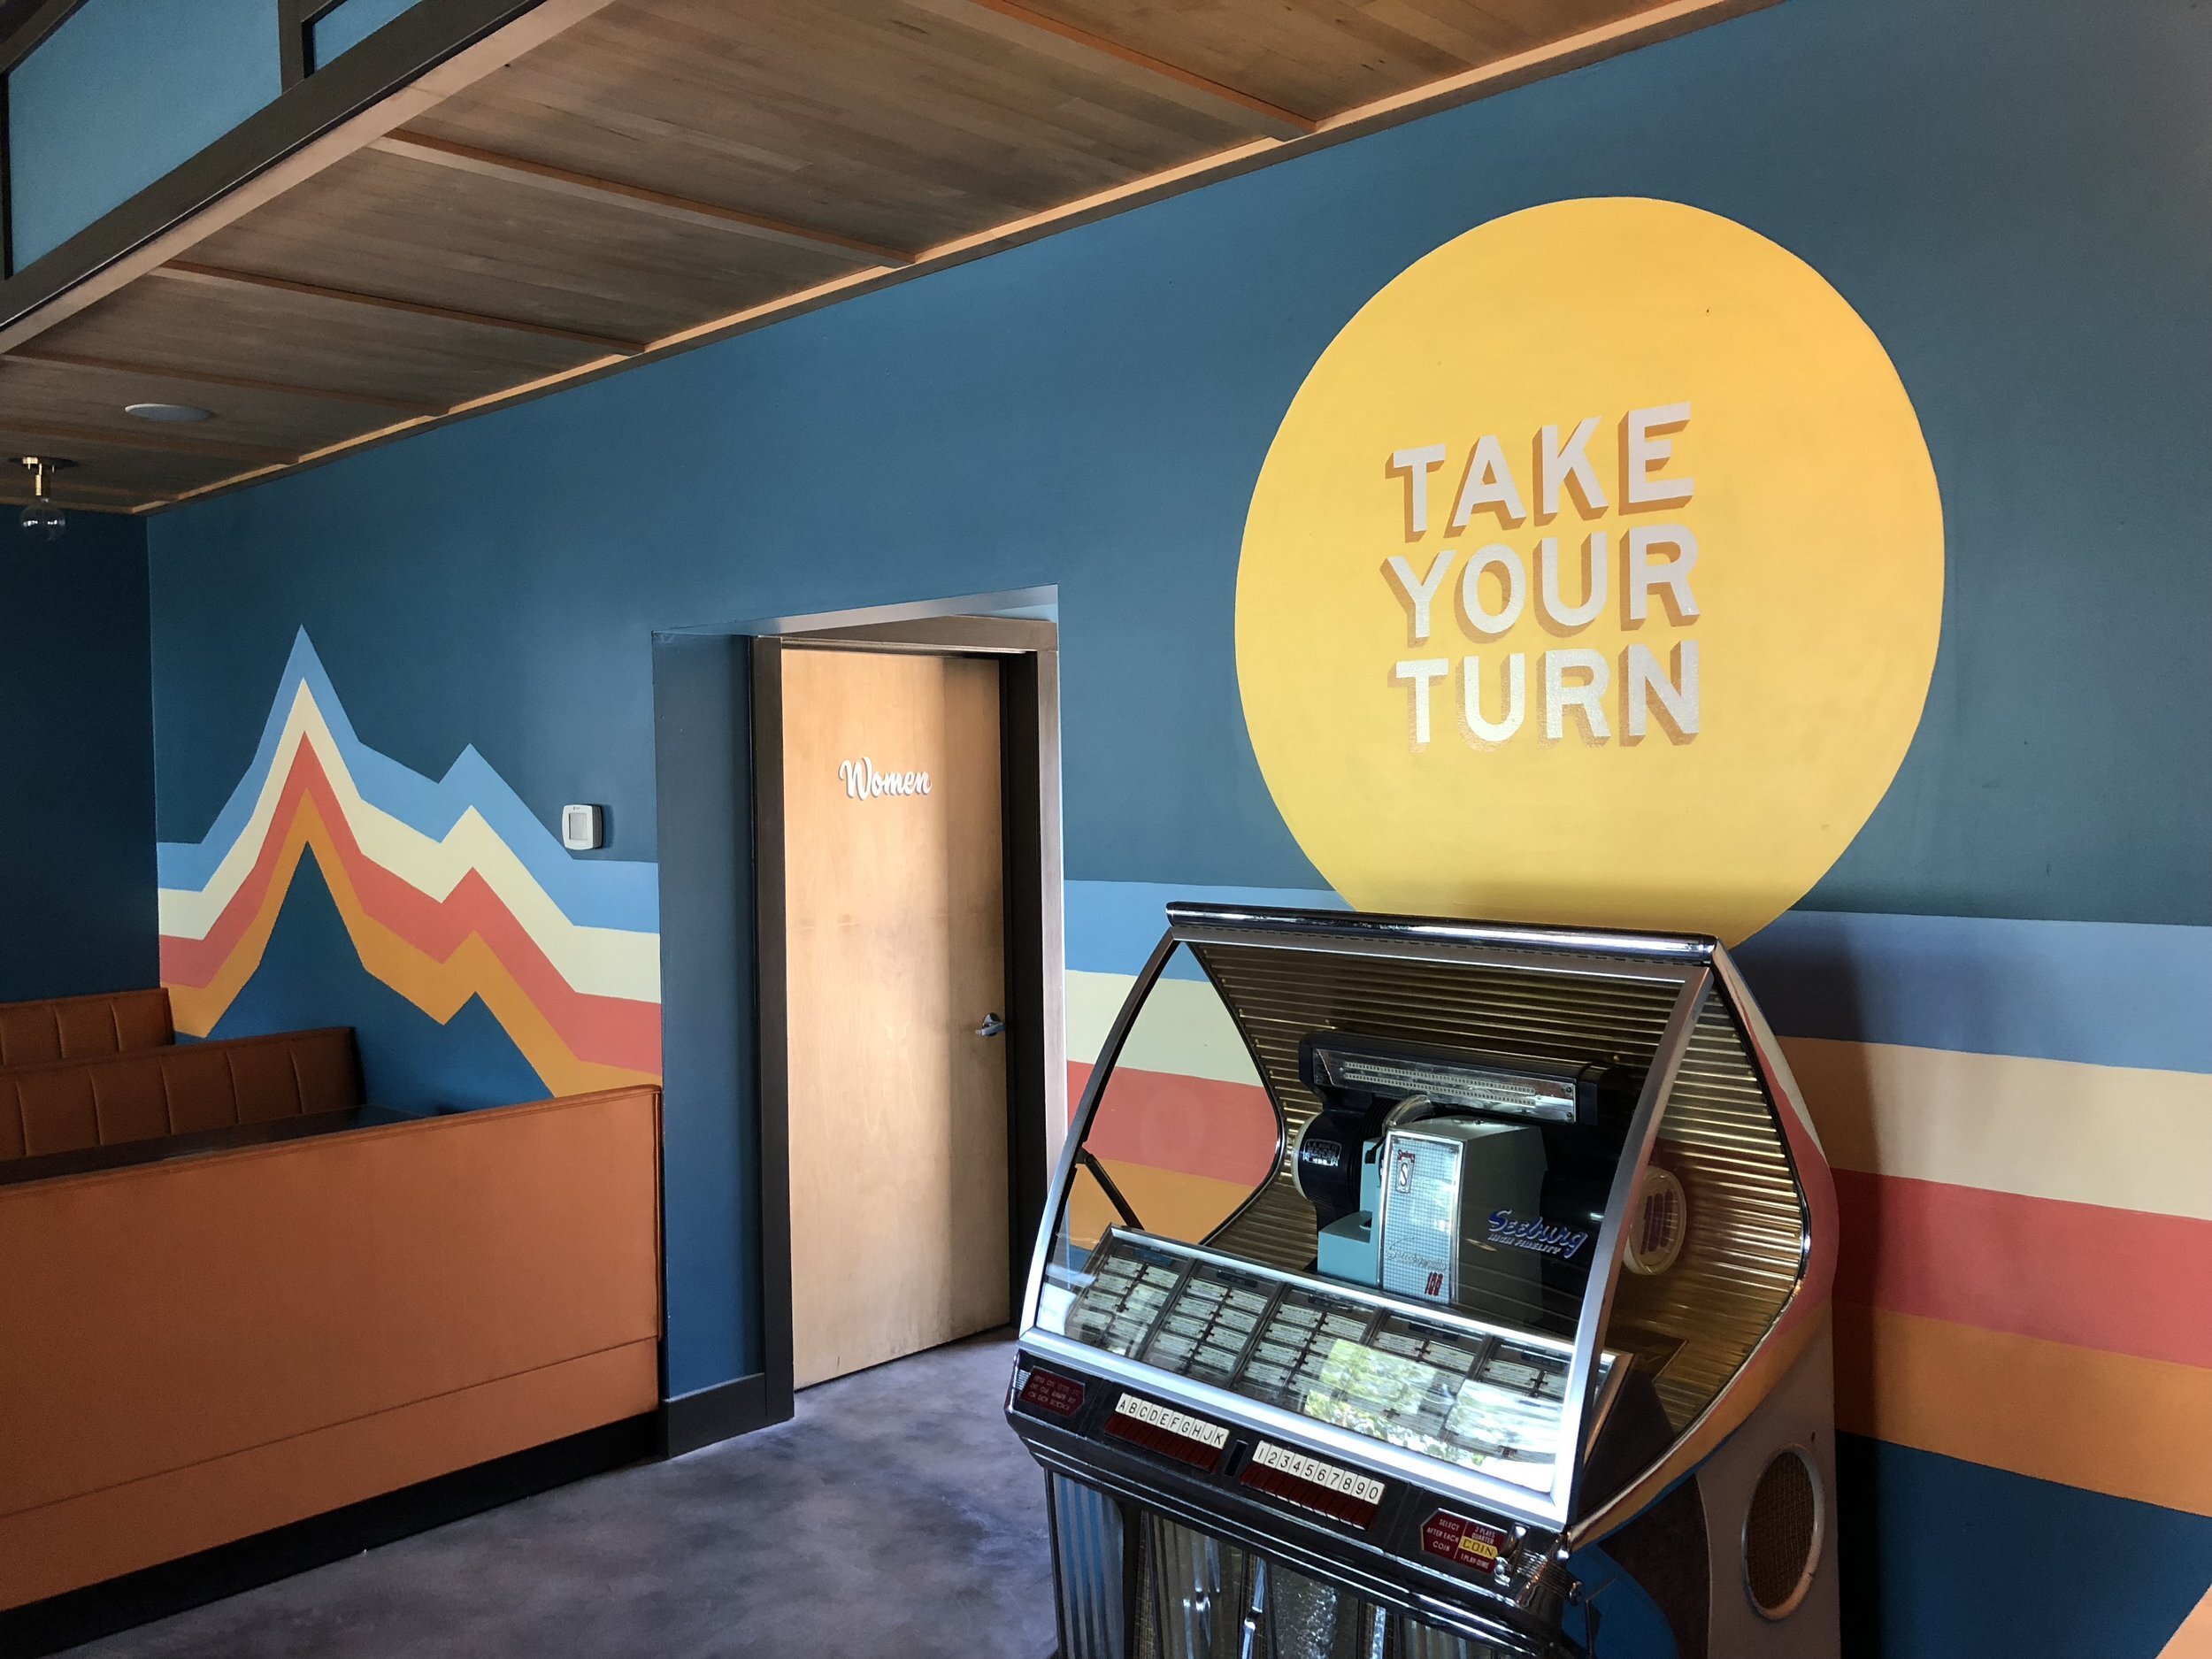 interior business mural reading "take your turn" hand painted by mural artist andrew manning